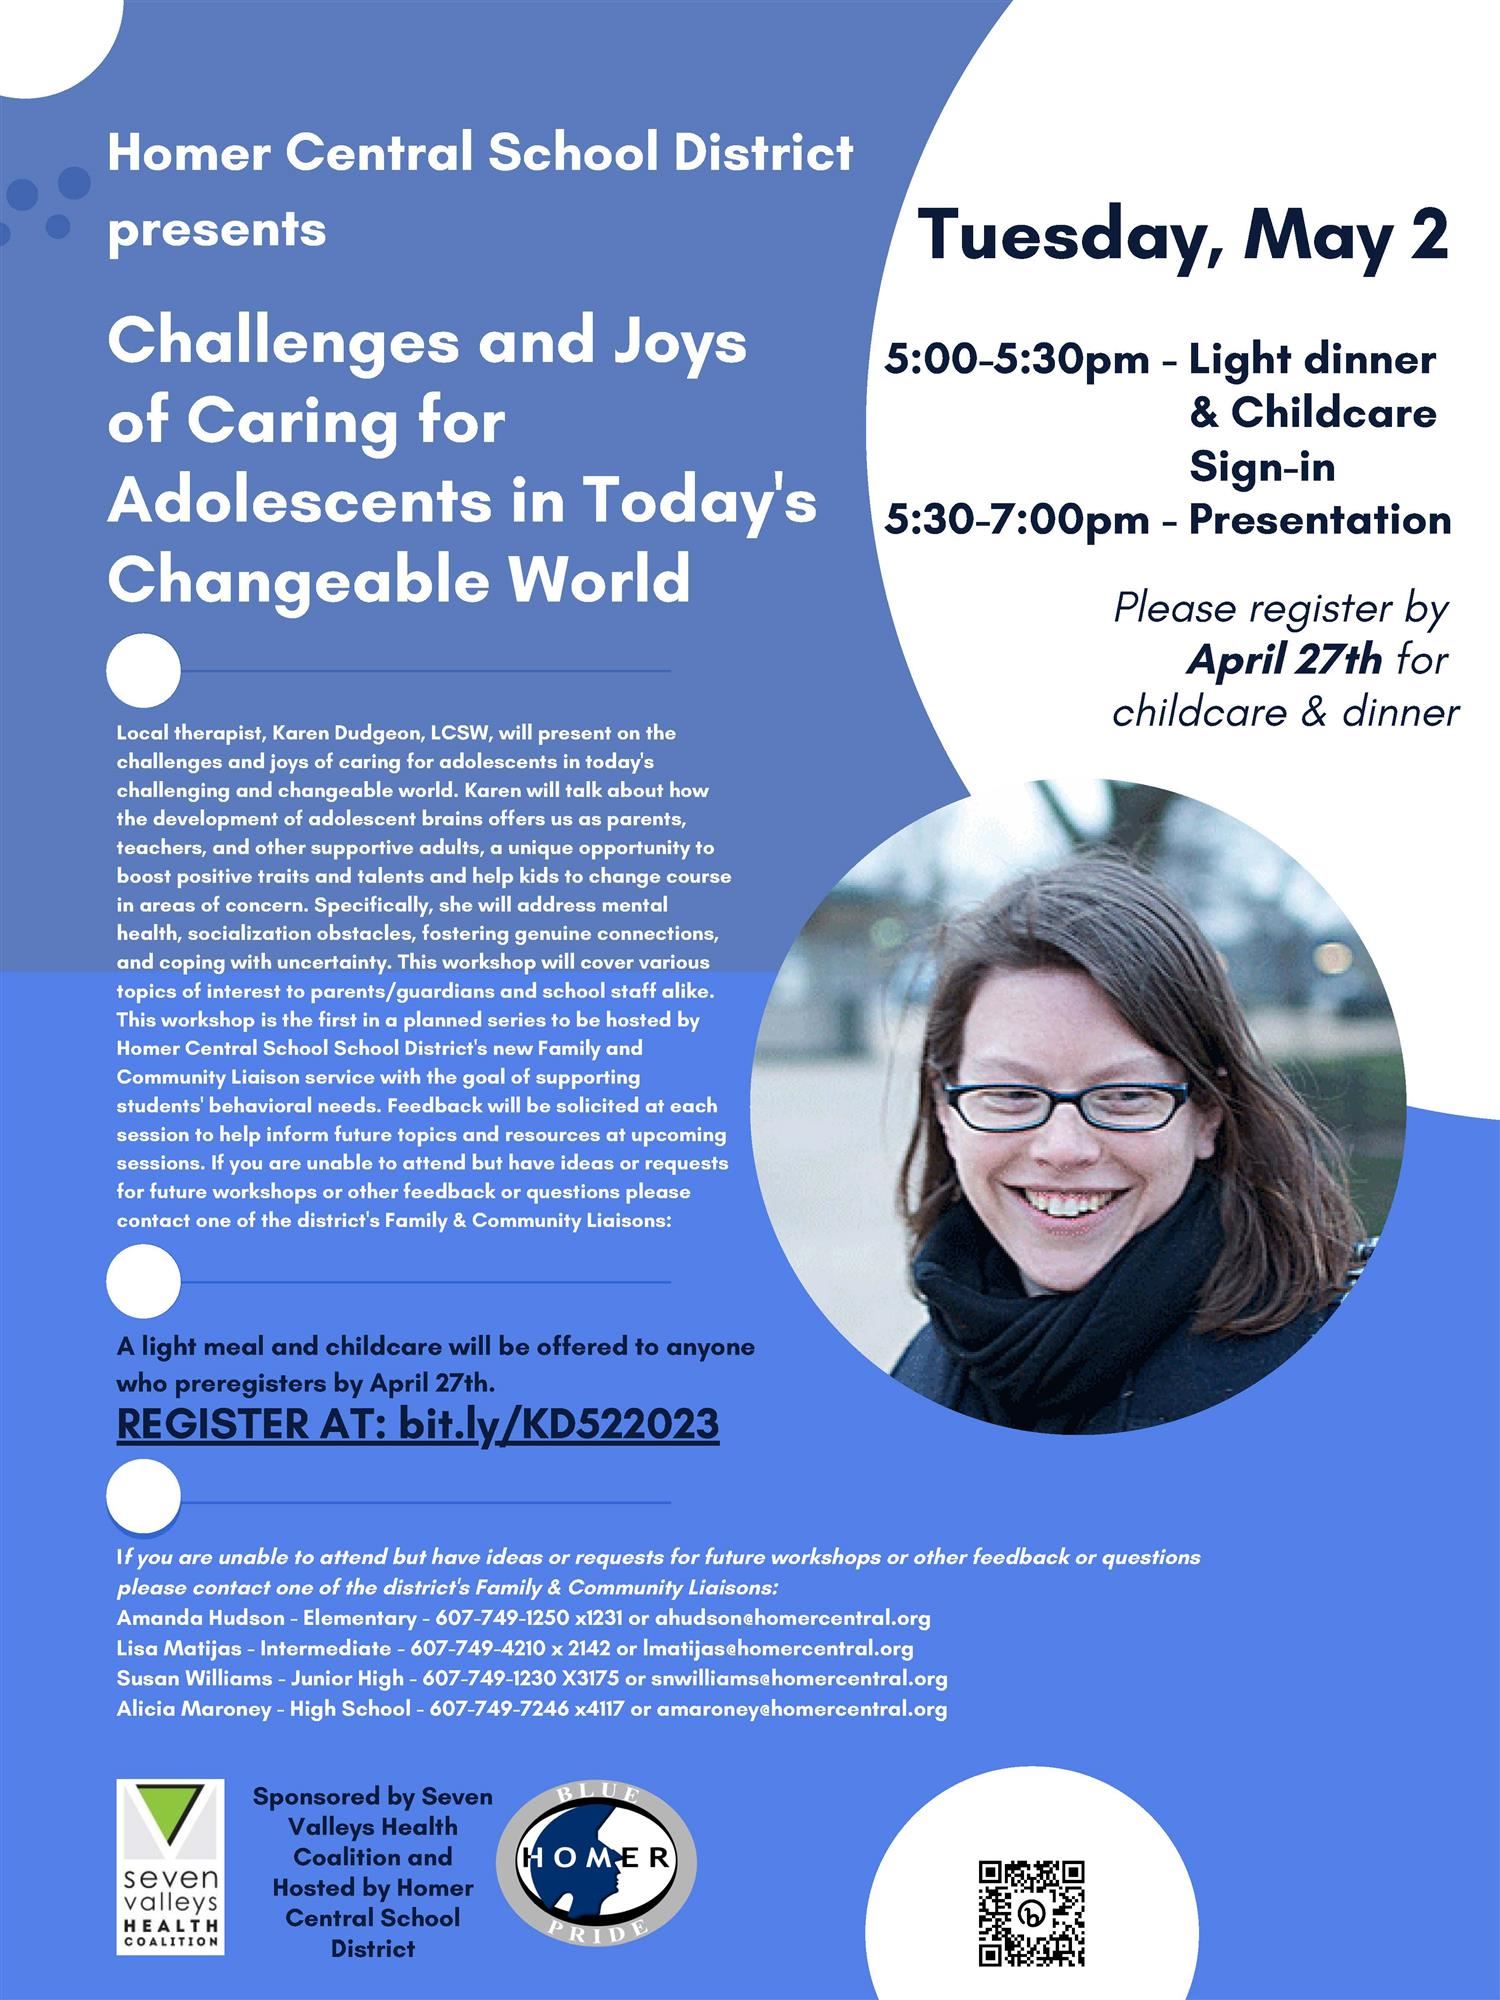 Challenges and Joys of Caring for Adolescents in Today's Changeable World